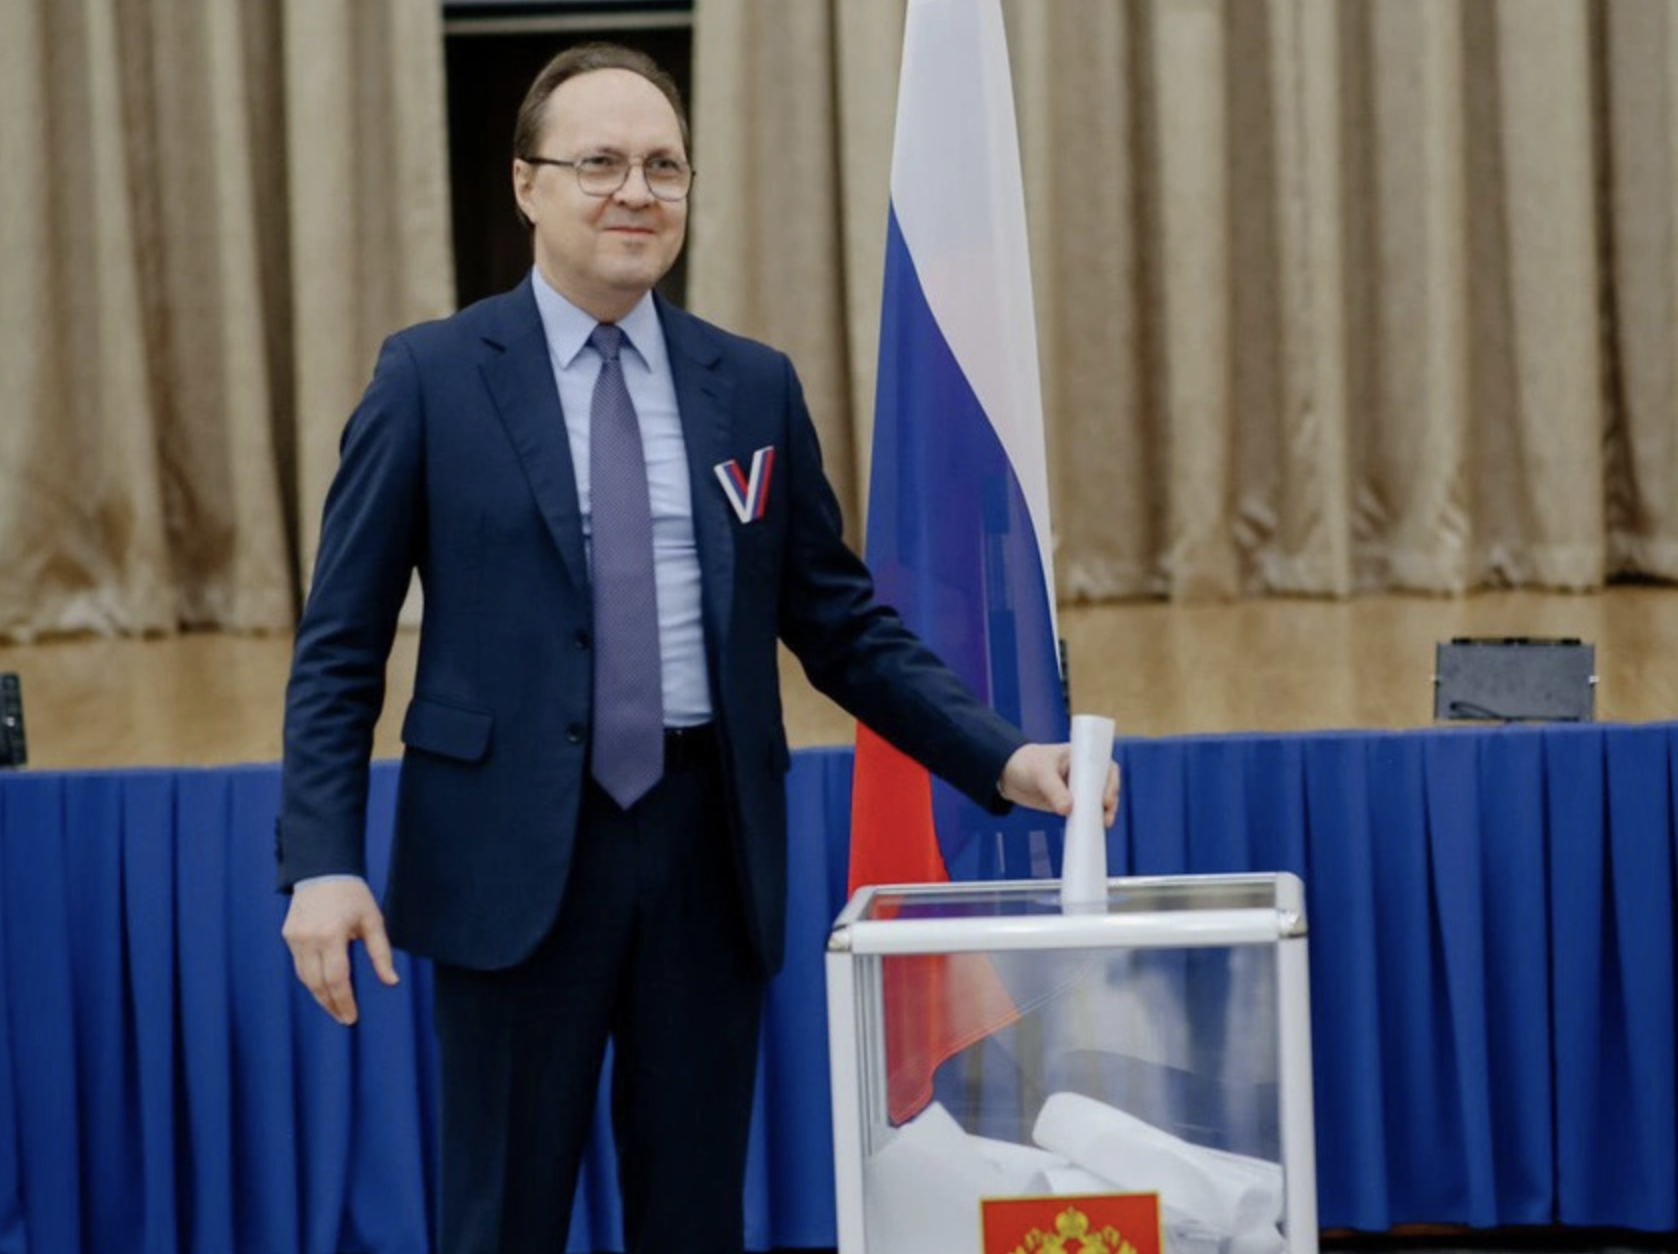 Russian citizens cast votes in presidential election in Vietnam